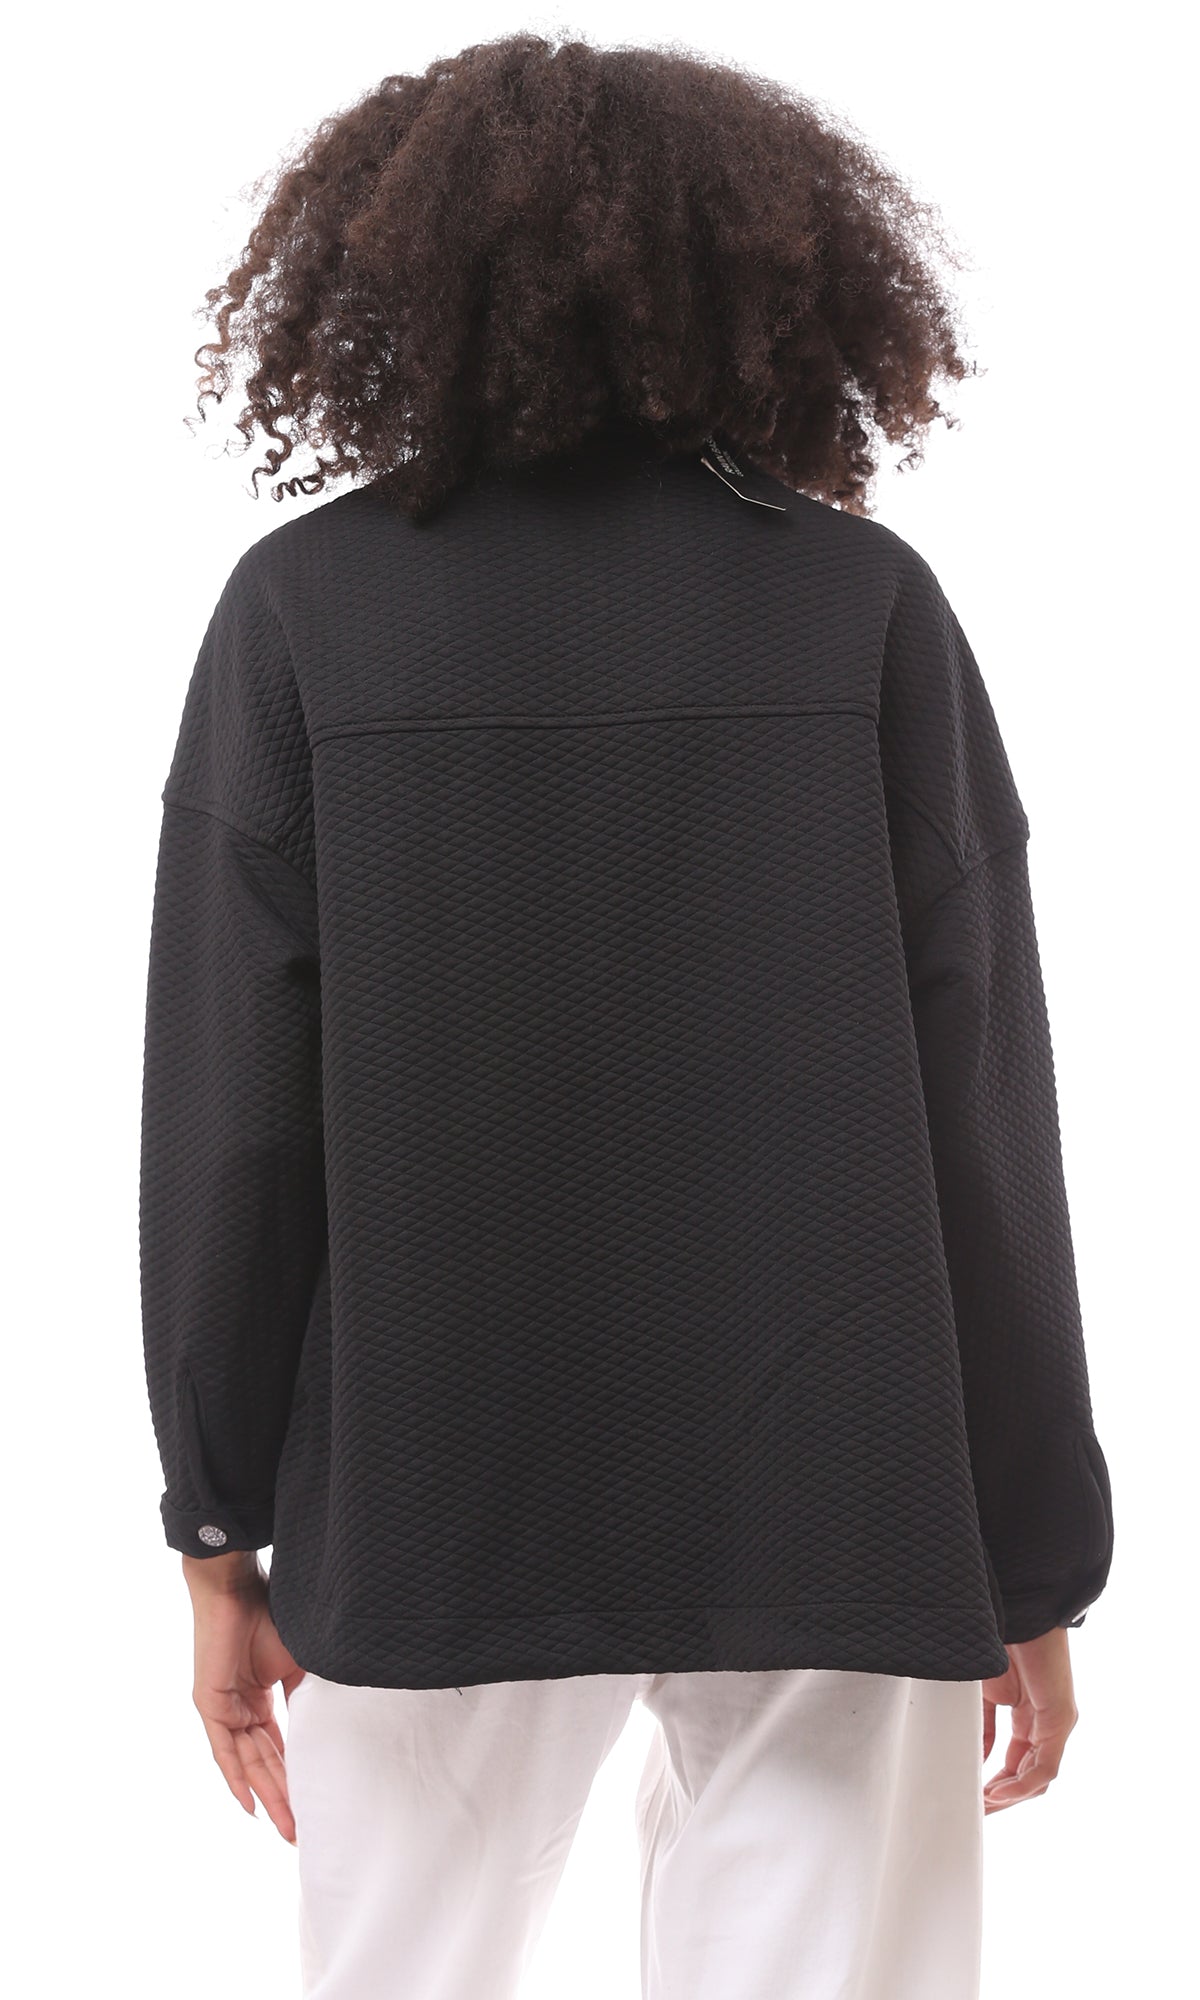 O175015 Black Self Diamonds Winter Shirt With Patched Pockets